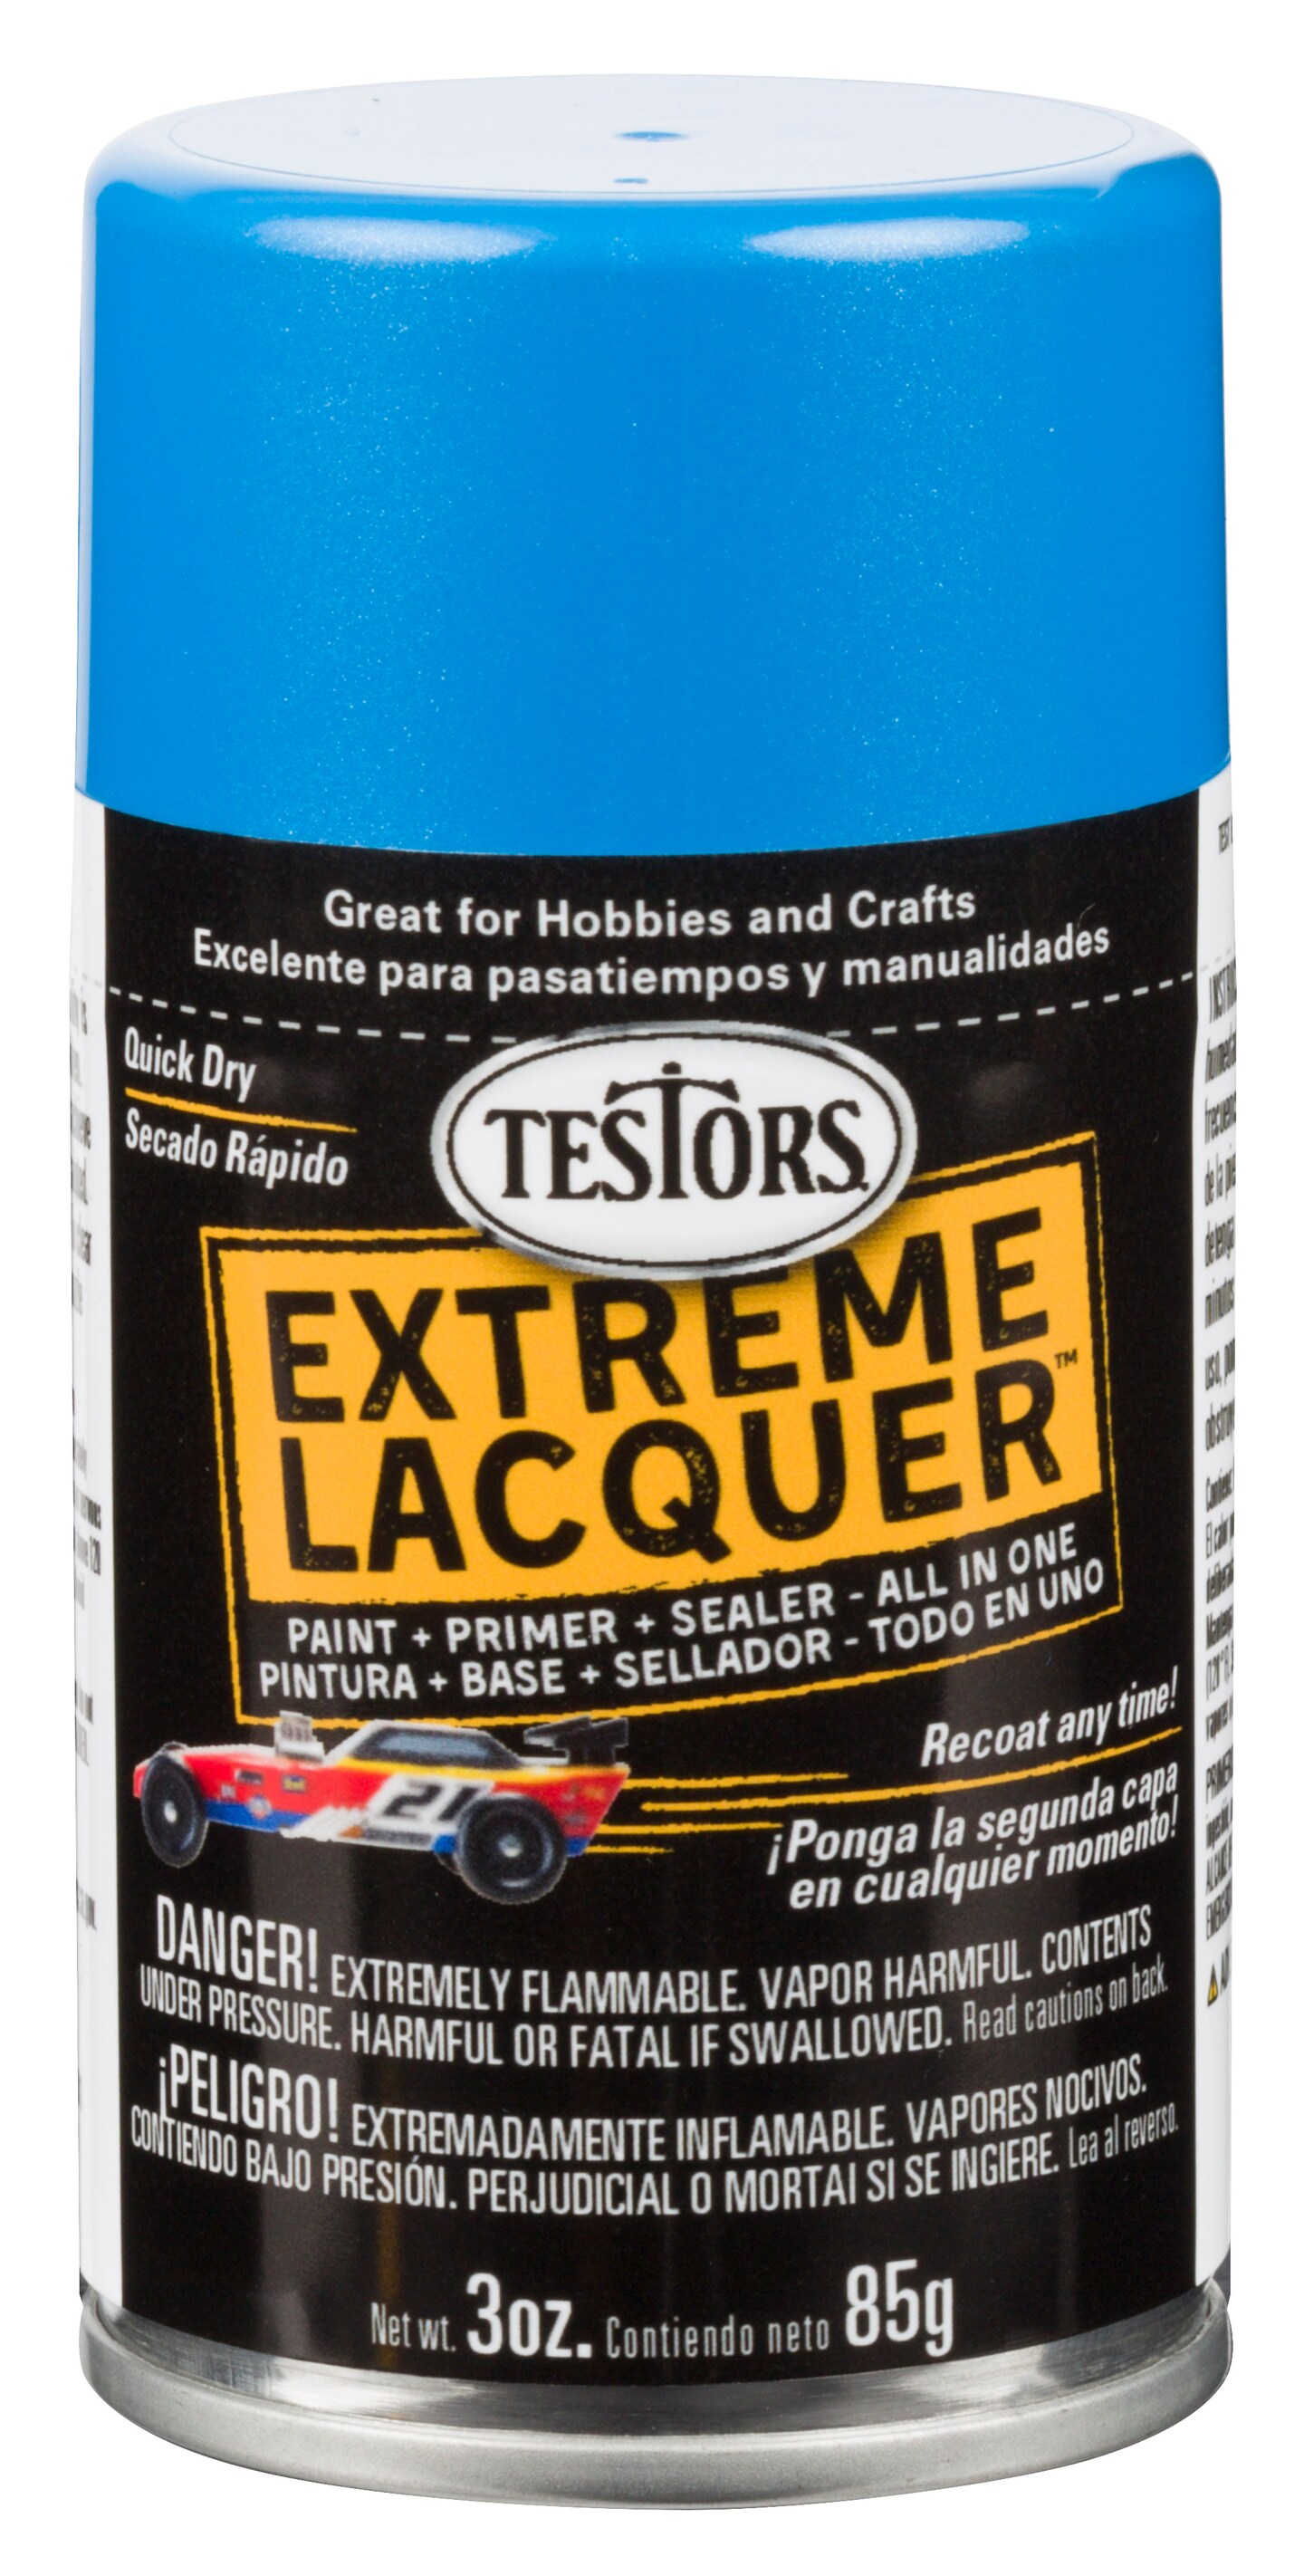 Testors One Coat Lacquer Paint, 3 oz. Spray Can, Icy Blue